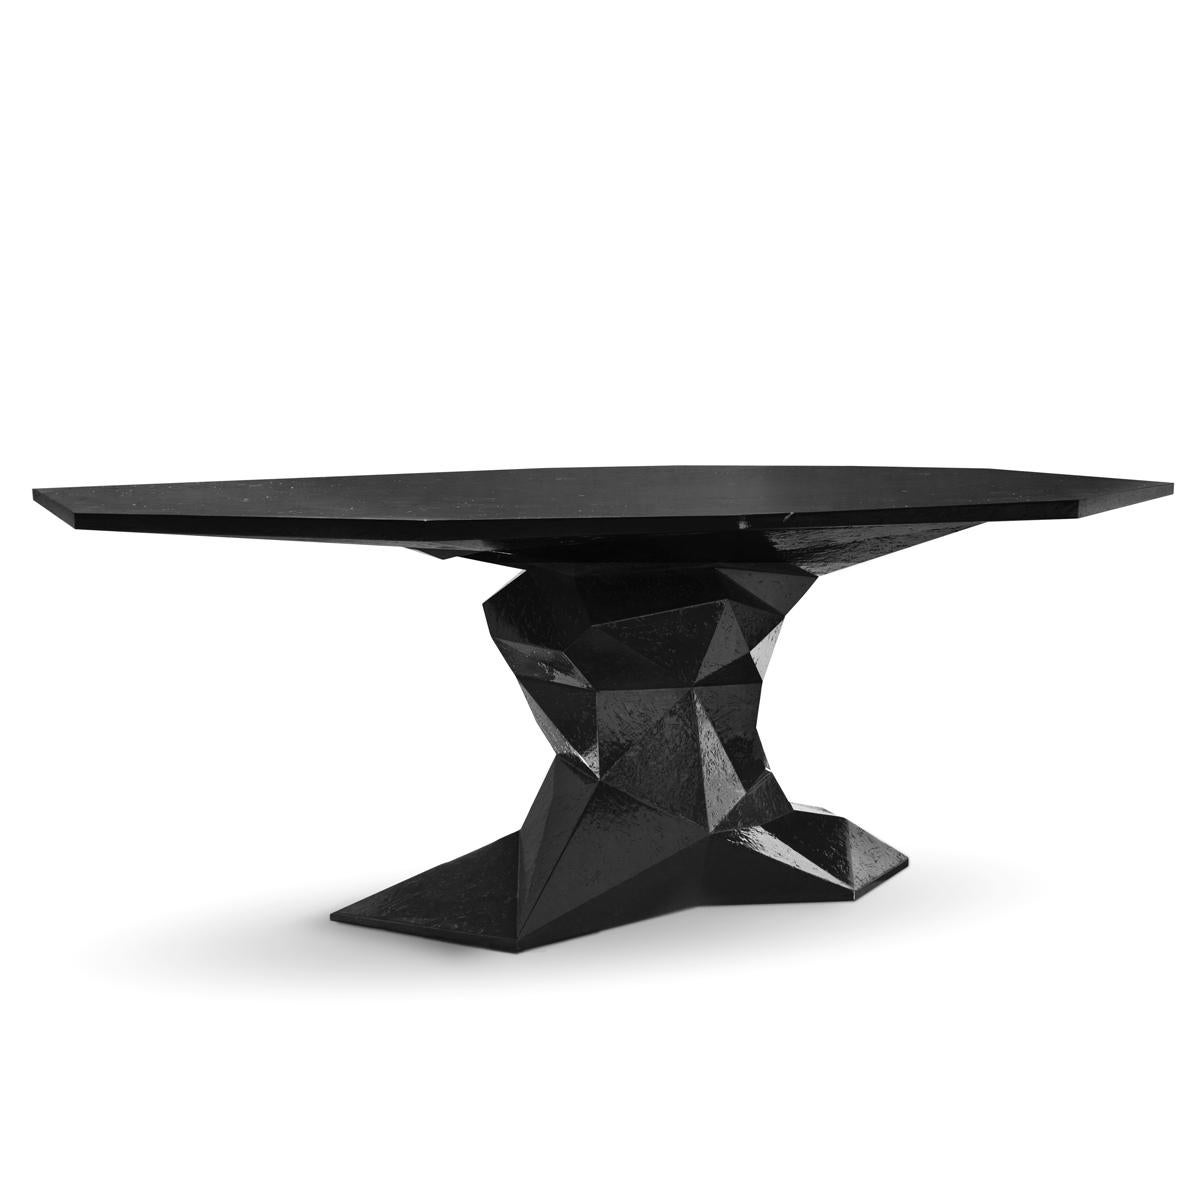 Dining table jungle black with wood structure lacquered 
with a translucent black tone with high gloss varnish.
Exceptional piece. Also available in jungle green finish.